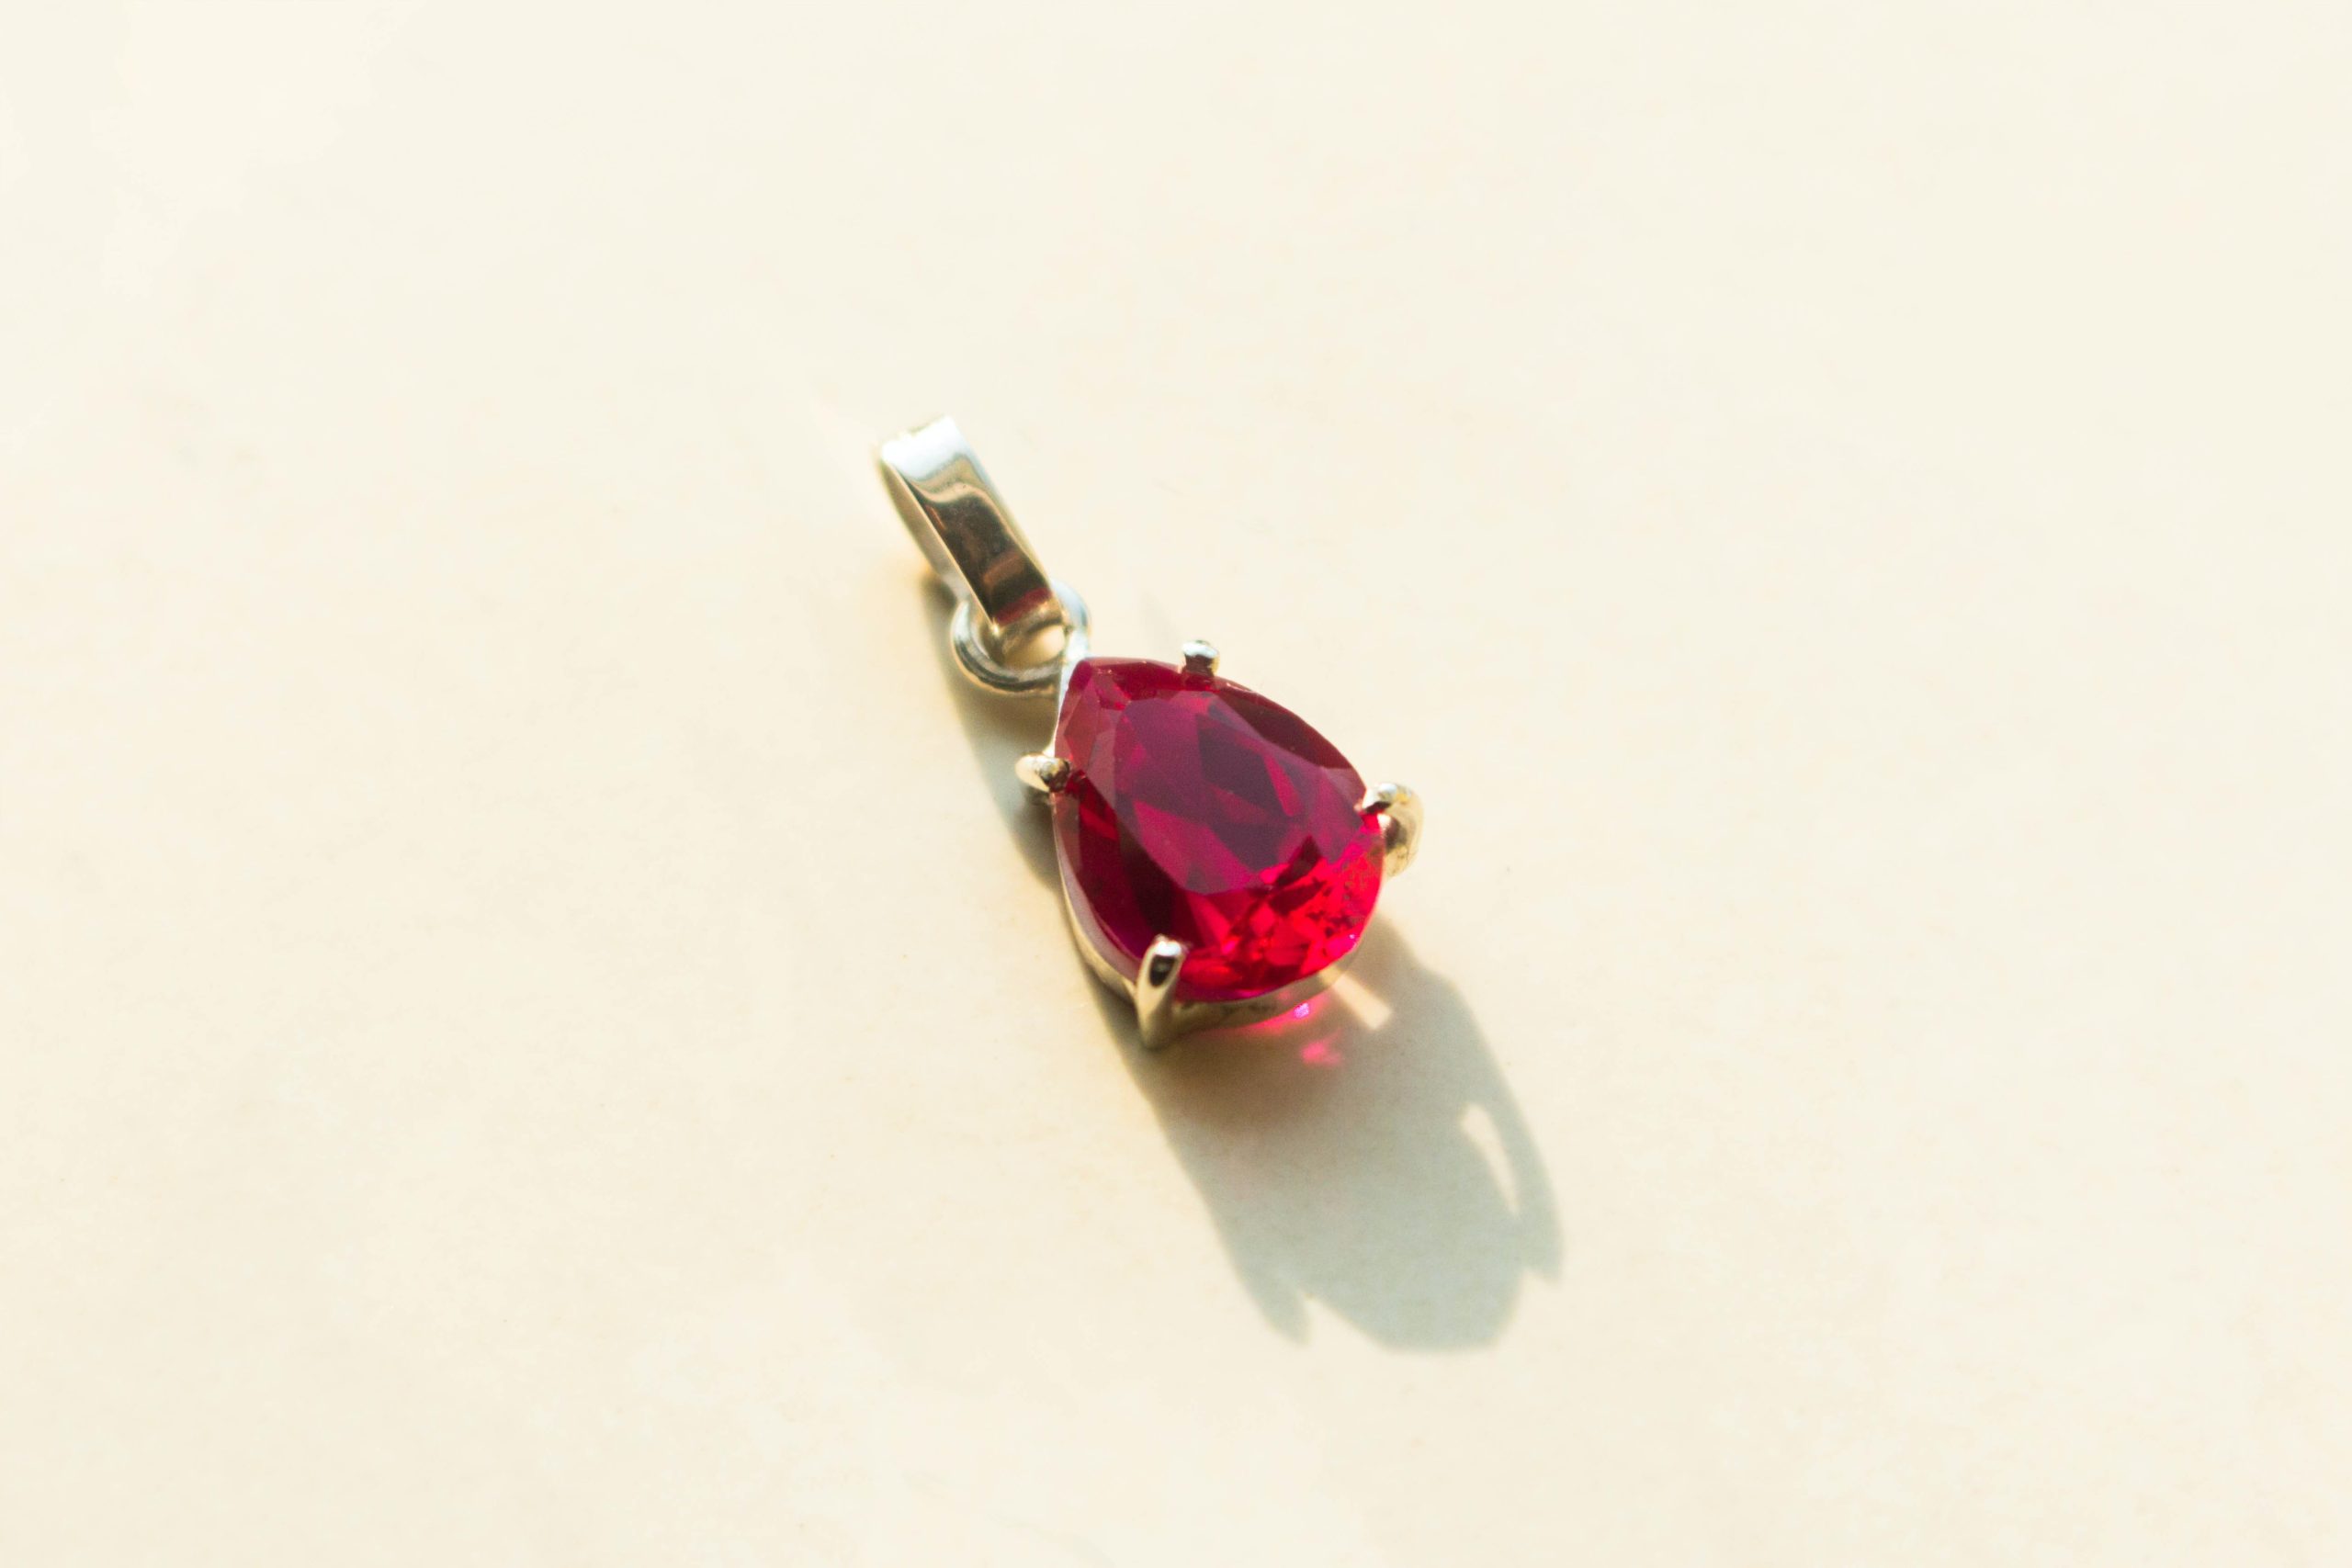 A red pendent